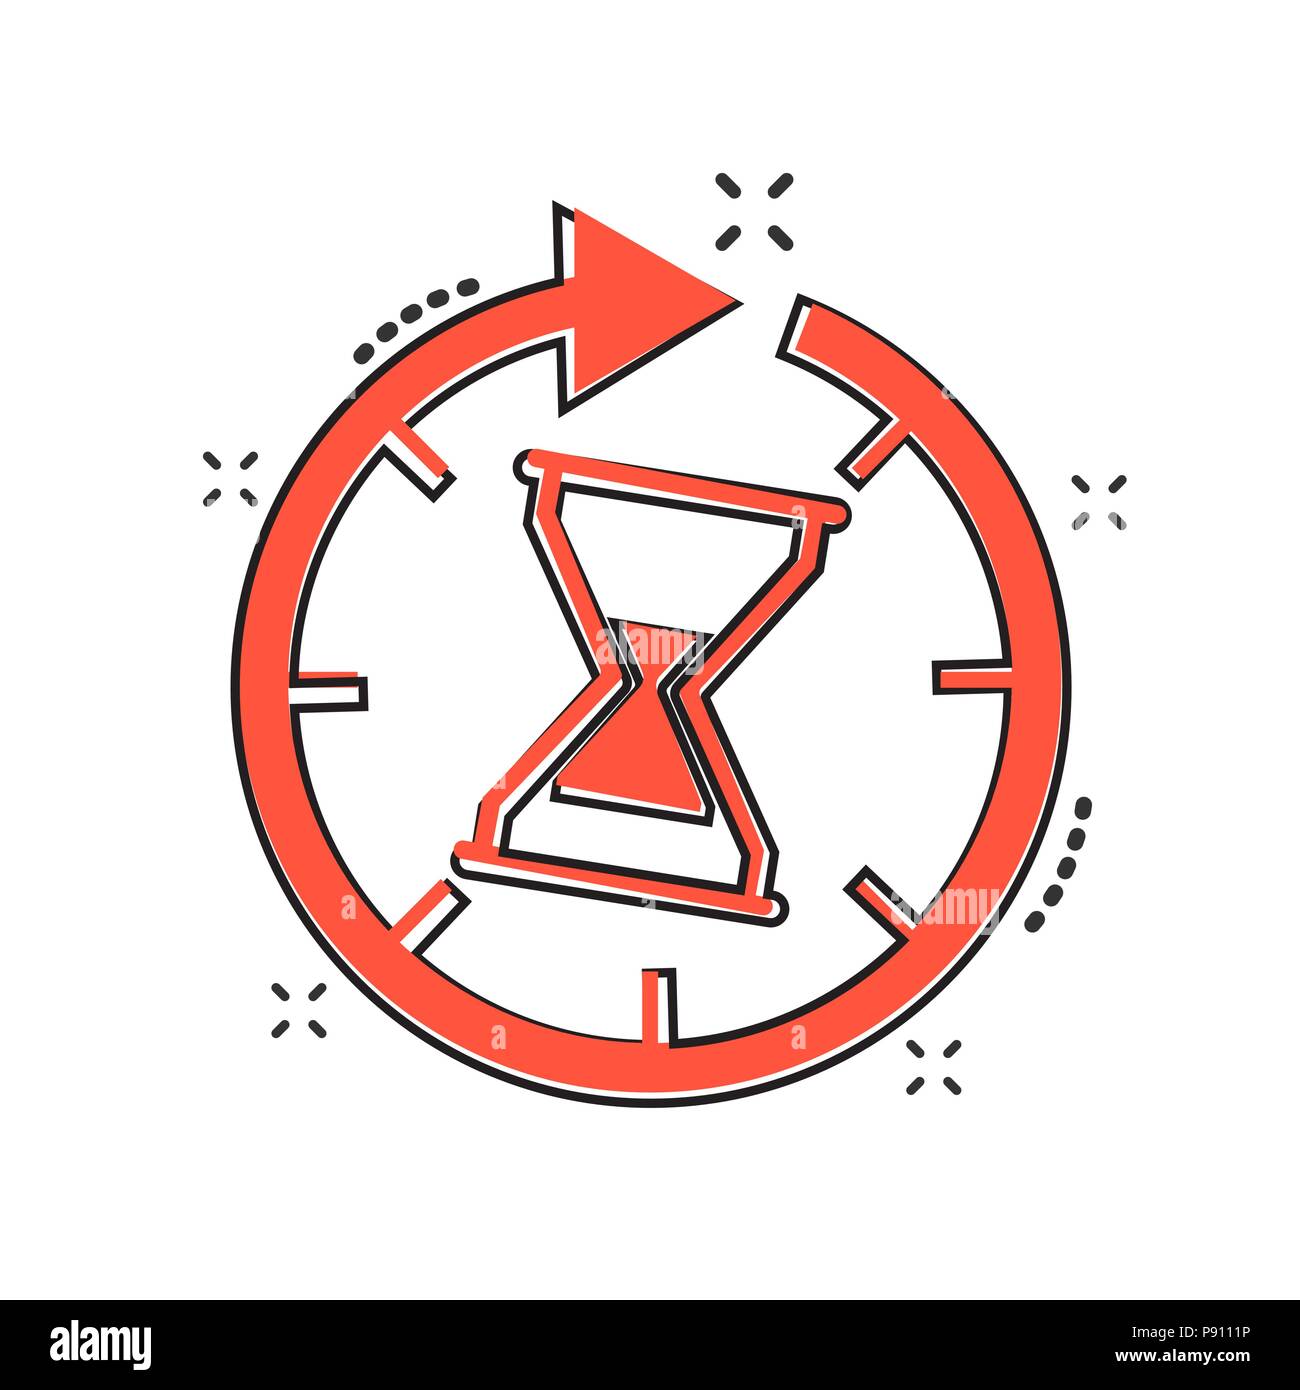 Vector cartoon time icon in comic style. Hourglass sign illustration pictogram. Sandglass clock business splash effect concept. Stock Vector